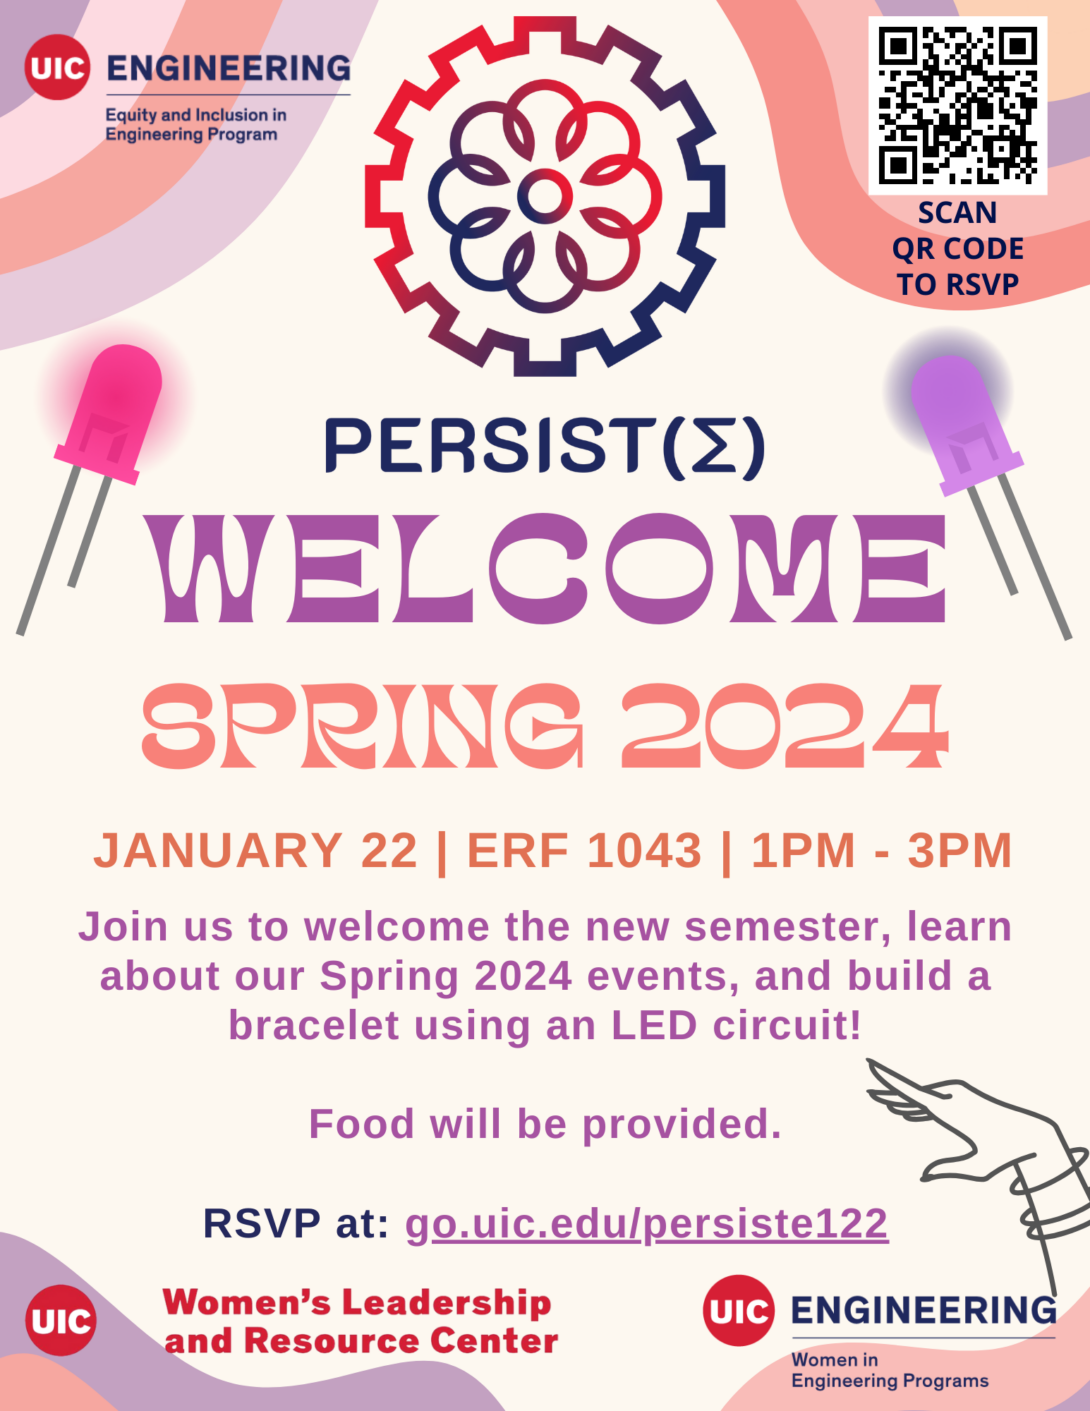 Details about the PERSIST(Σ) Spring Welcome (same text on this page) in purple and orange text on a cream background. Above the text is the PERSIST(Σ) logo, a stylized gear. At the bottom right is a hand with bracelets on it.